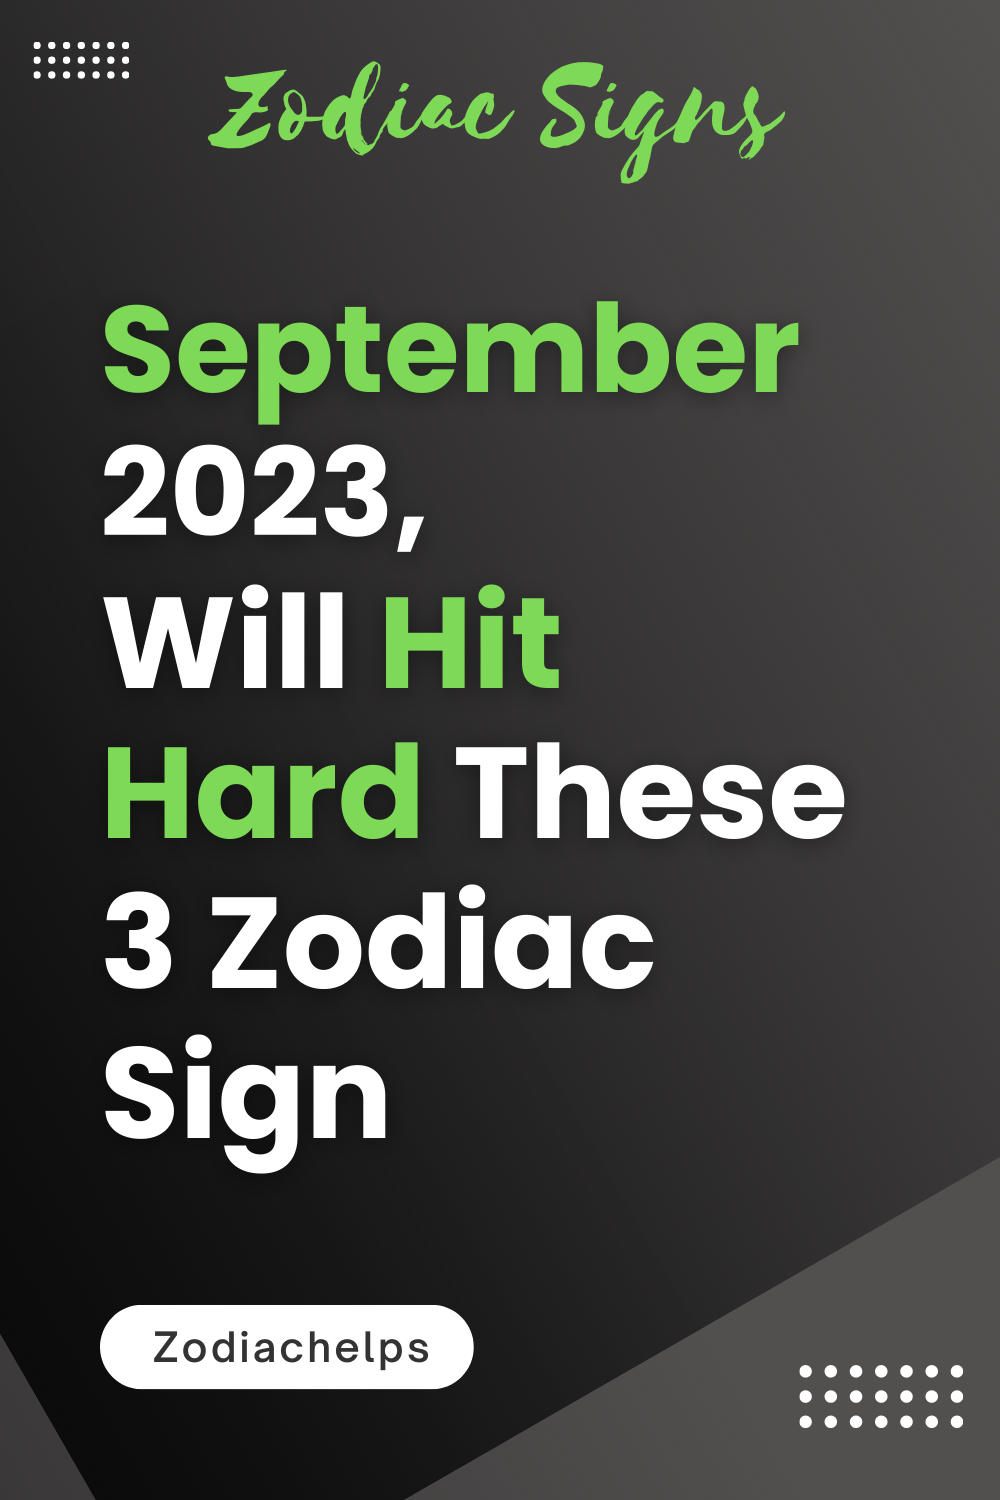 September 2023, Will Hit Hard These 3 Zodiac Signs